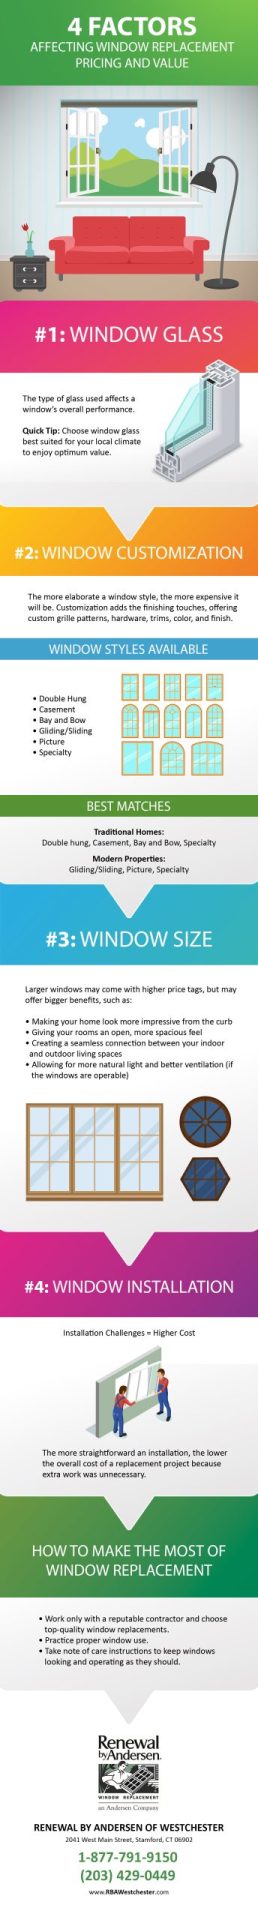 4 Factors Affecting Window Replacement Pricing